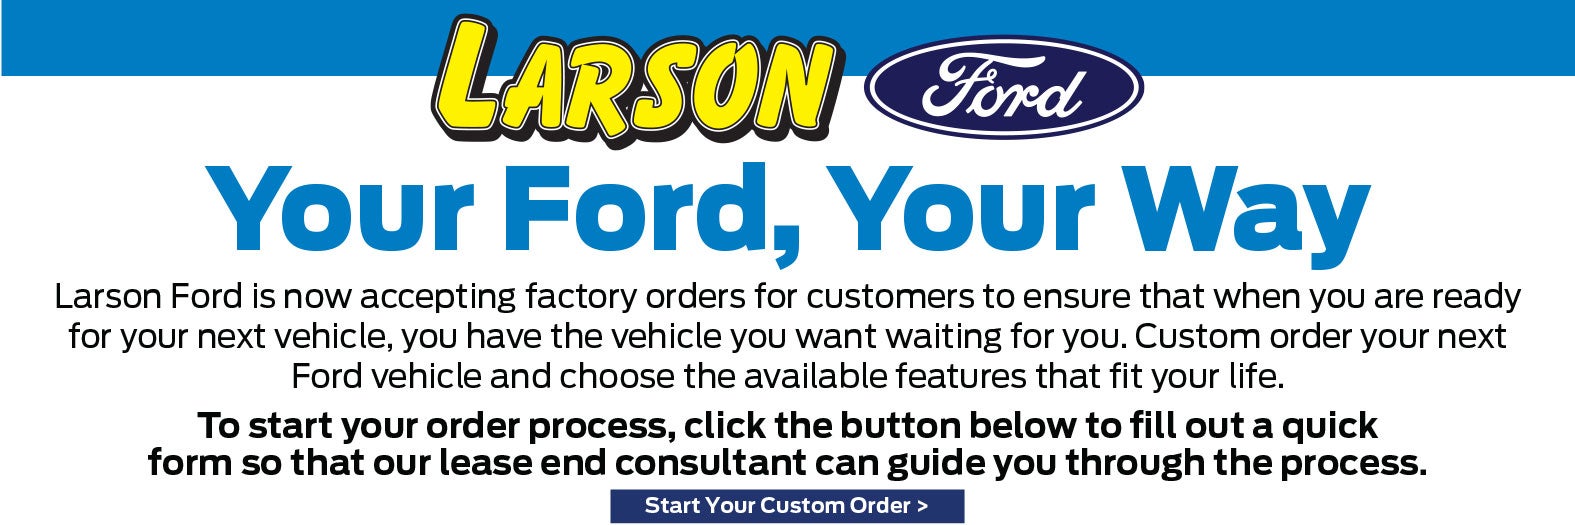 Larson Ford Your Ford Your Way